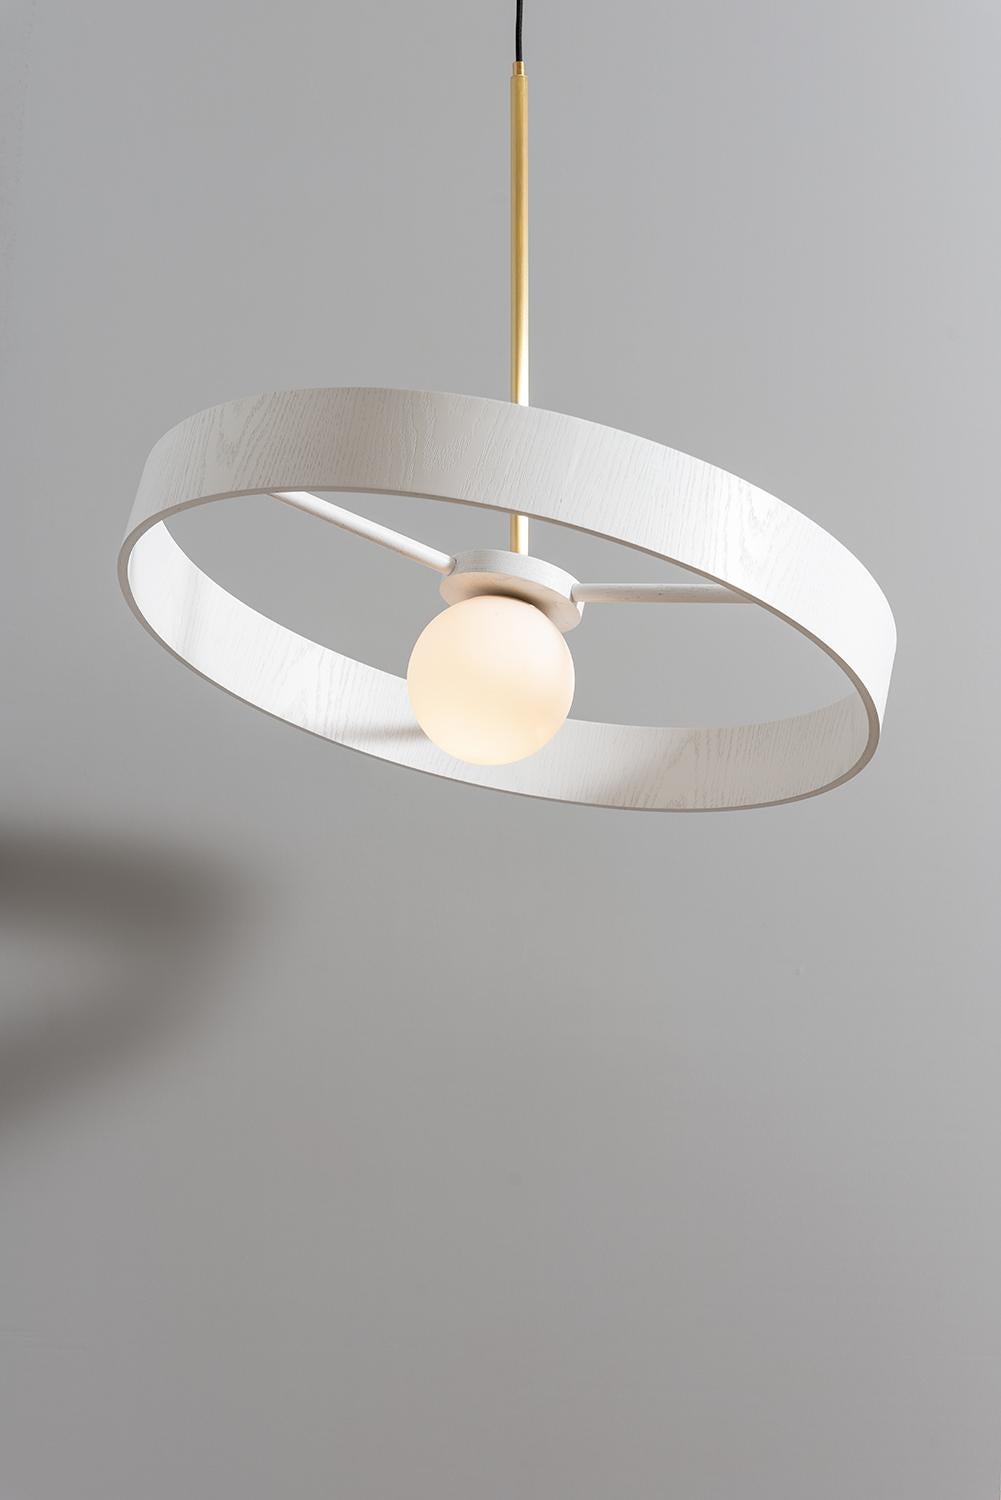 Round thin pendant by ASAF Weinbroom Studio
Dimensions: Ø70 x 57 cm
Materials: Ball glass + Wood + Brass

Canopy: Brass
Cord fabric: Black 2m
Wattage / Type socket: 15w Max Led / E27
ASAF WEINBROOM studio was established in 2009.

All our